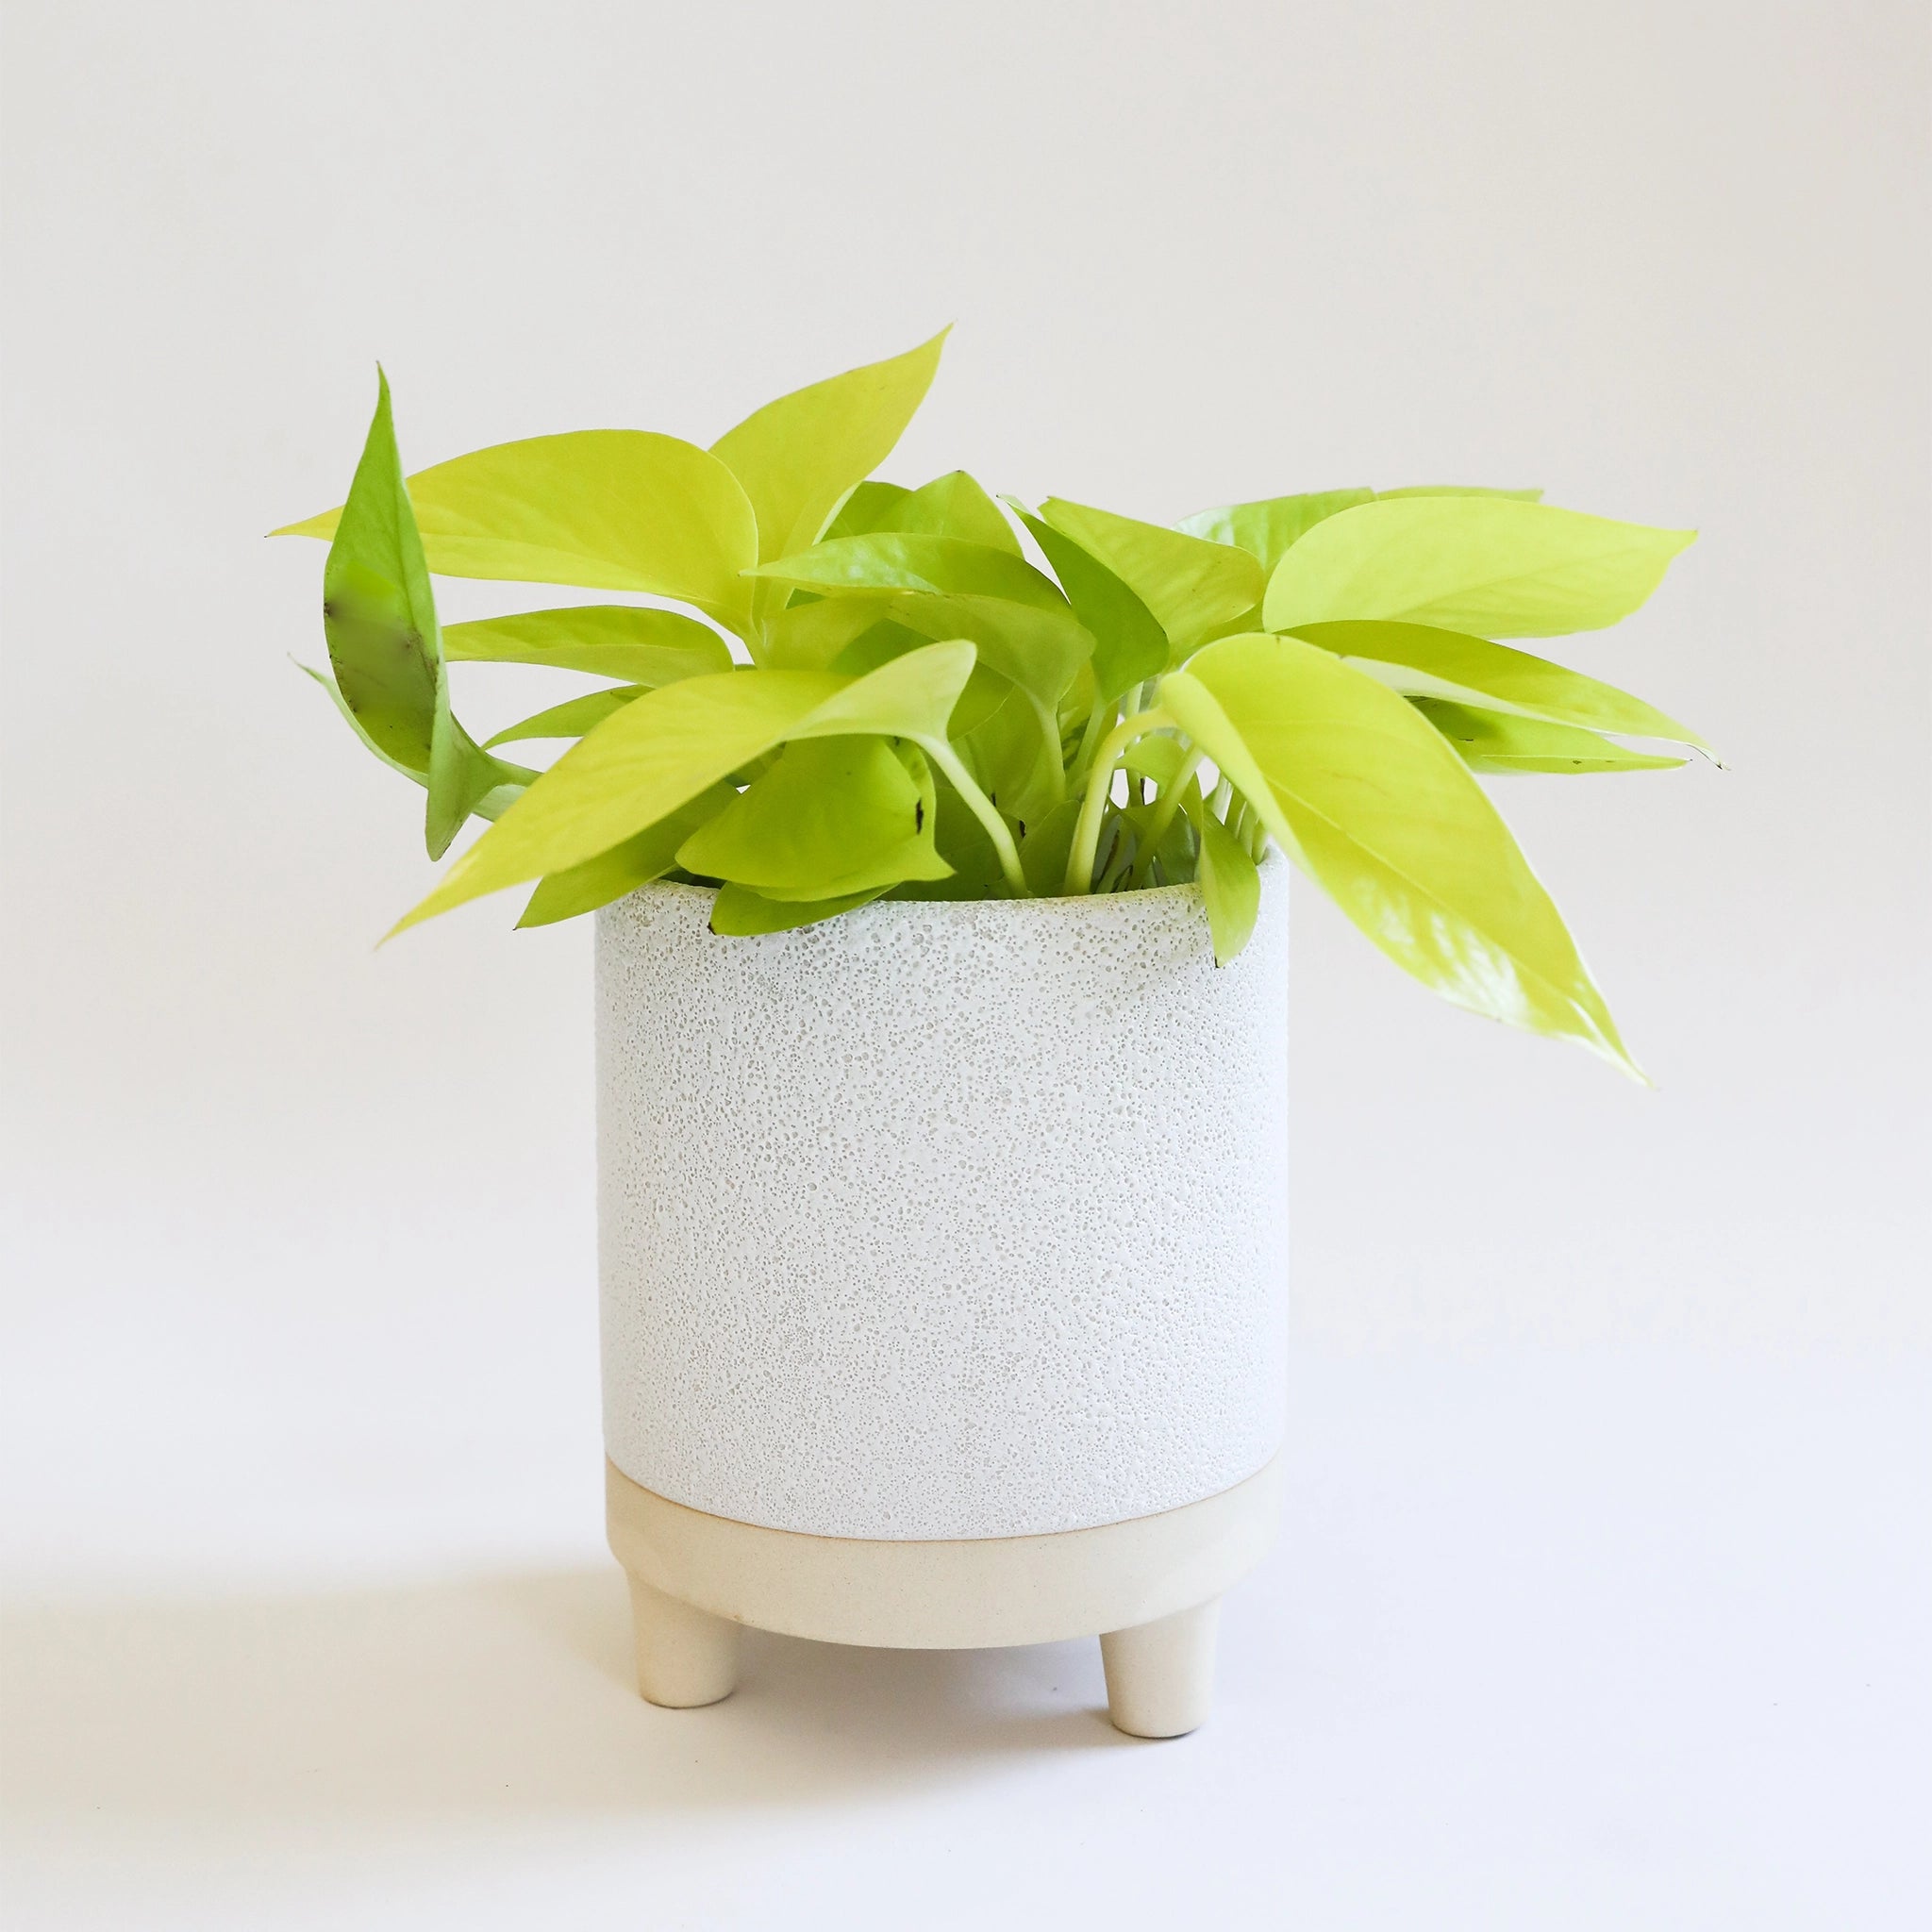 white textured pot with tan footed base is filled with a lush lime green plant